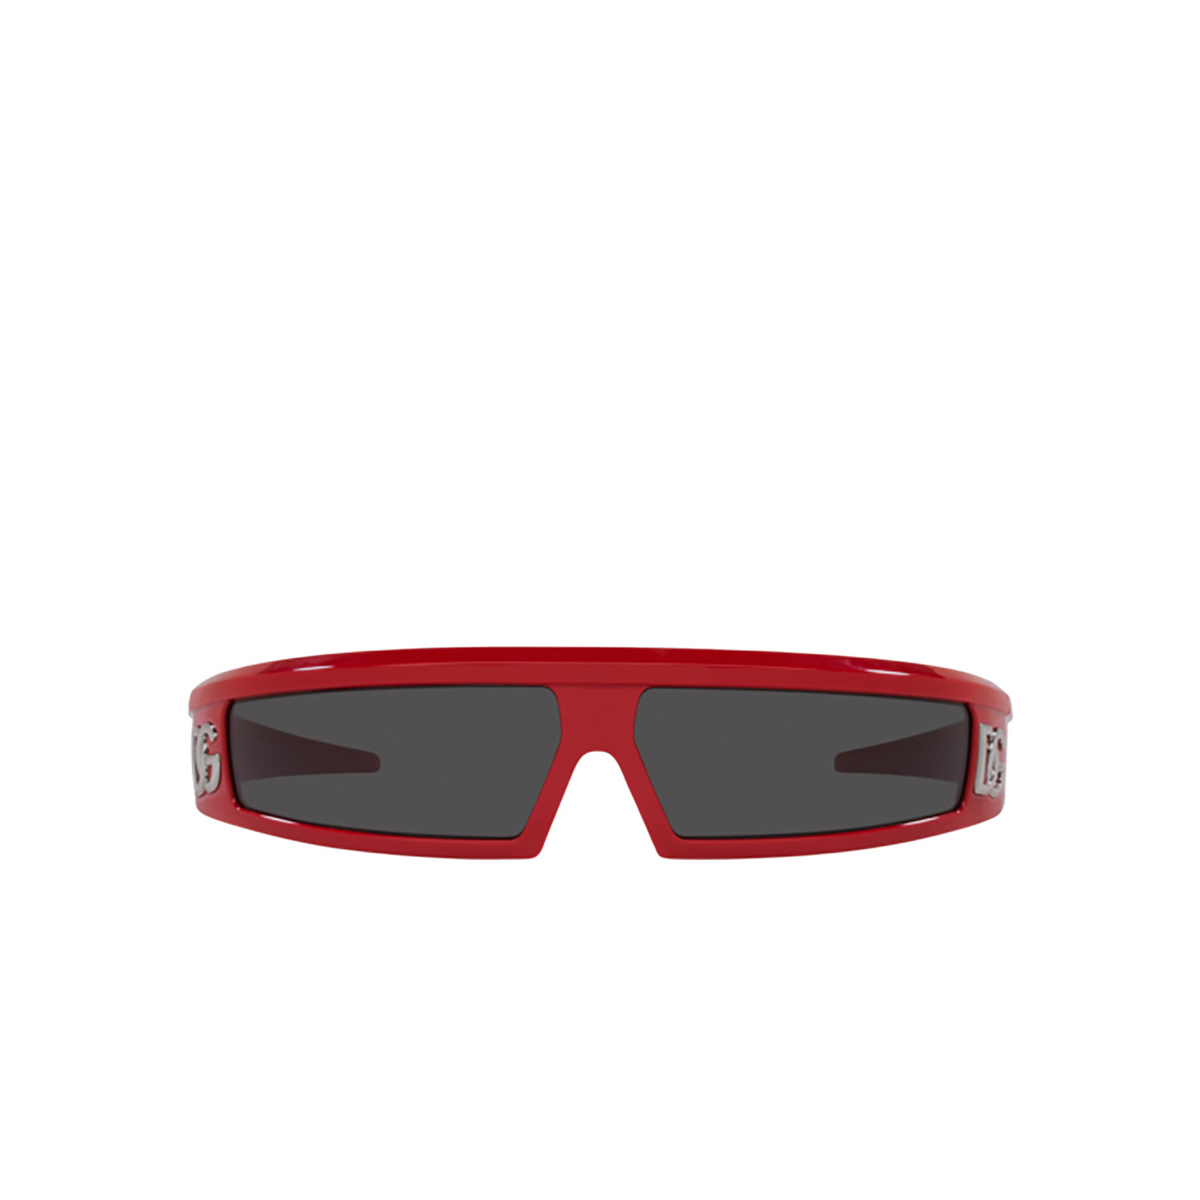 Dolce & Gabbana DG6181 Sunglasses 309887 Red - front view